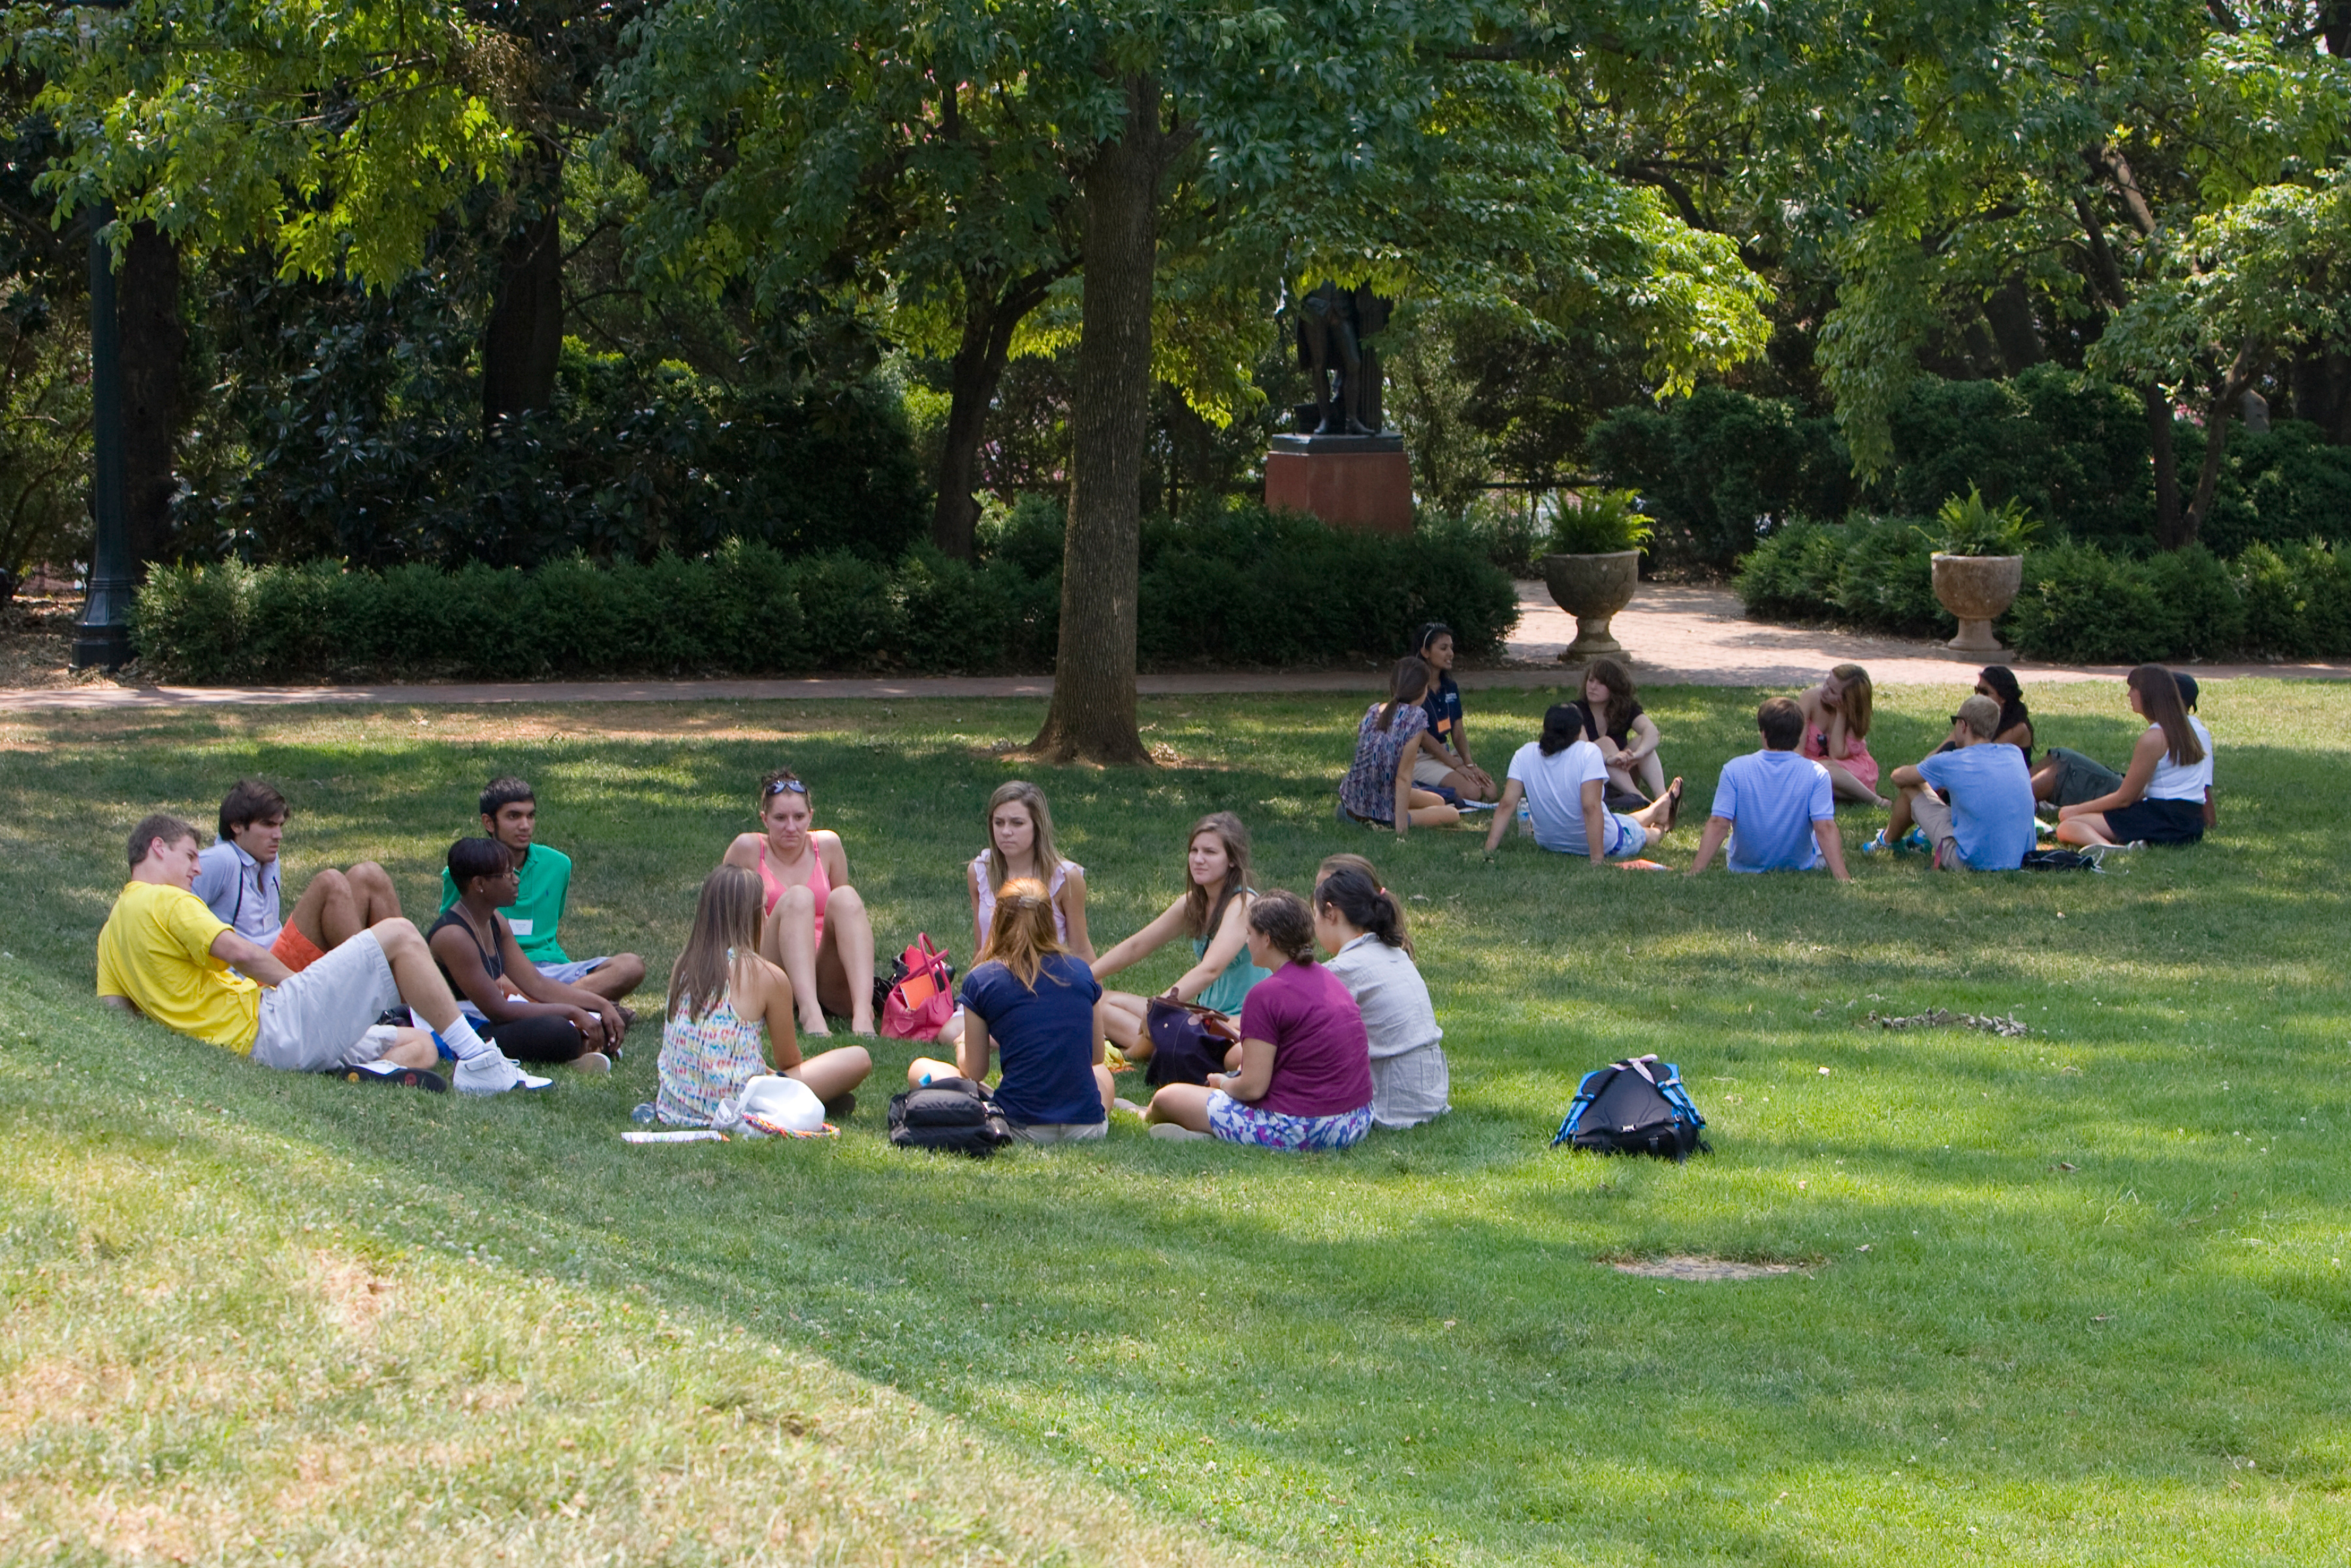 Students sitting in circles on the grass